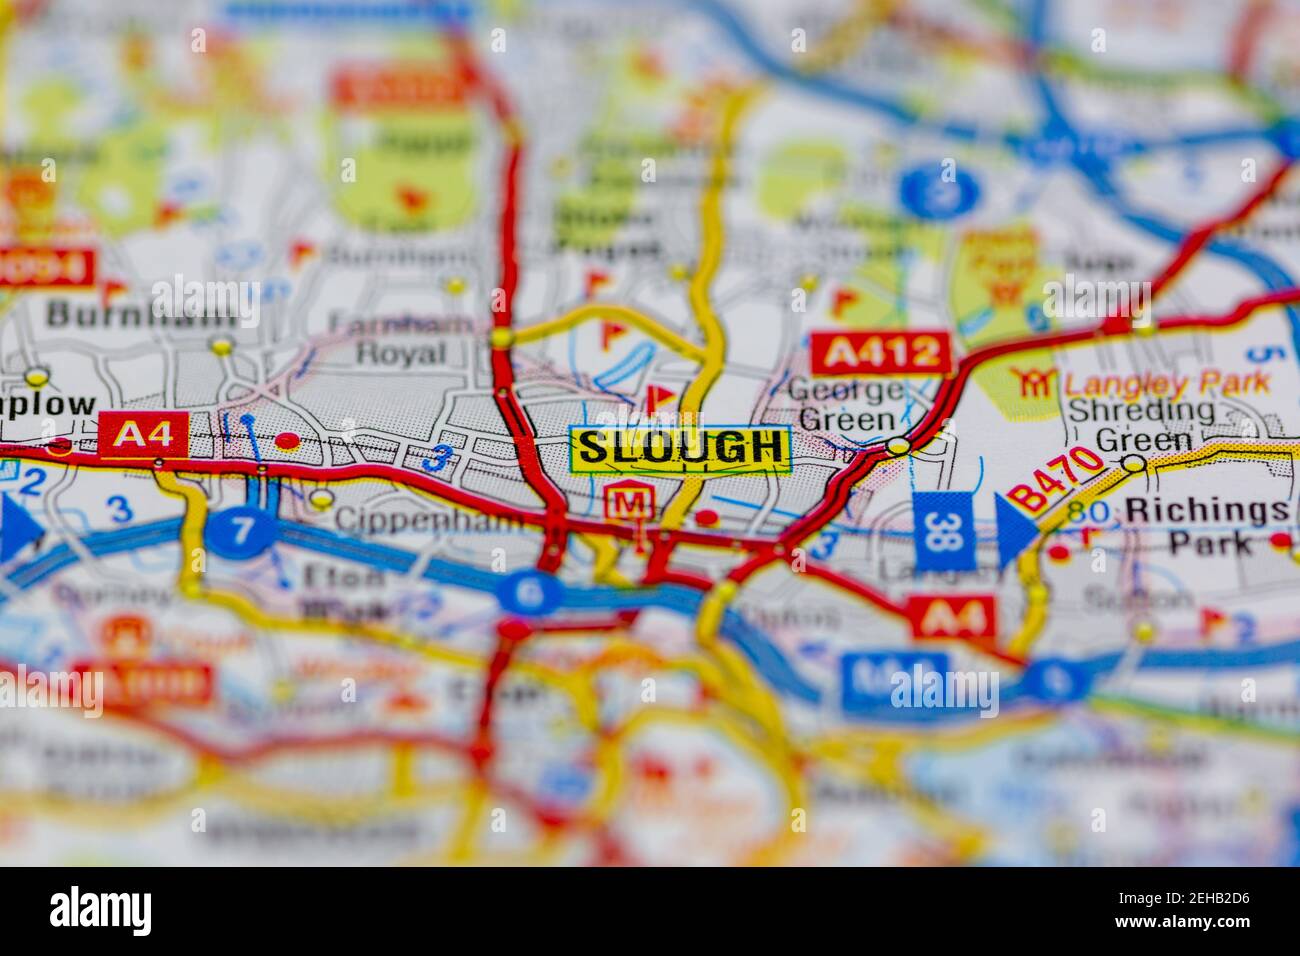 Slough and surrounding areas shown on a road map or Geography map Stock Photo